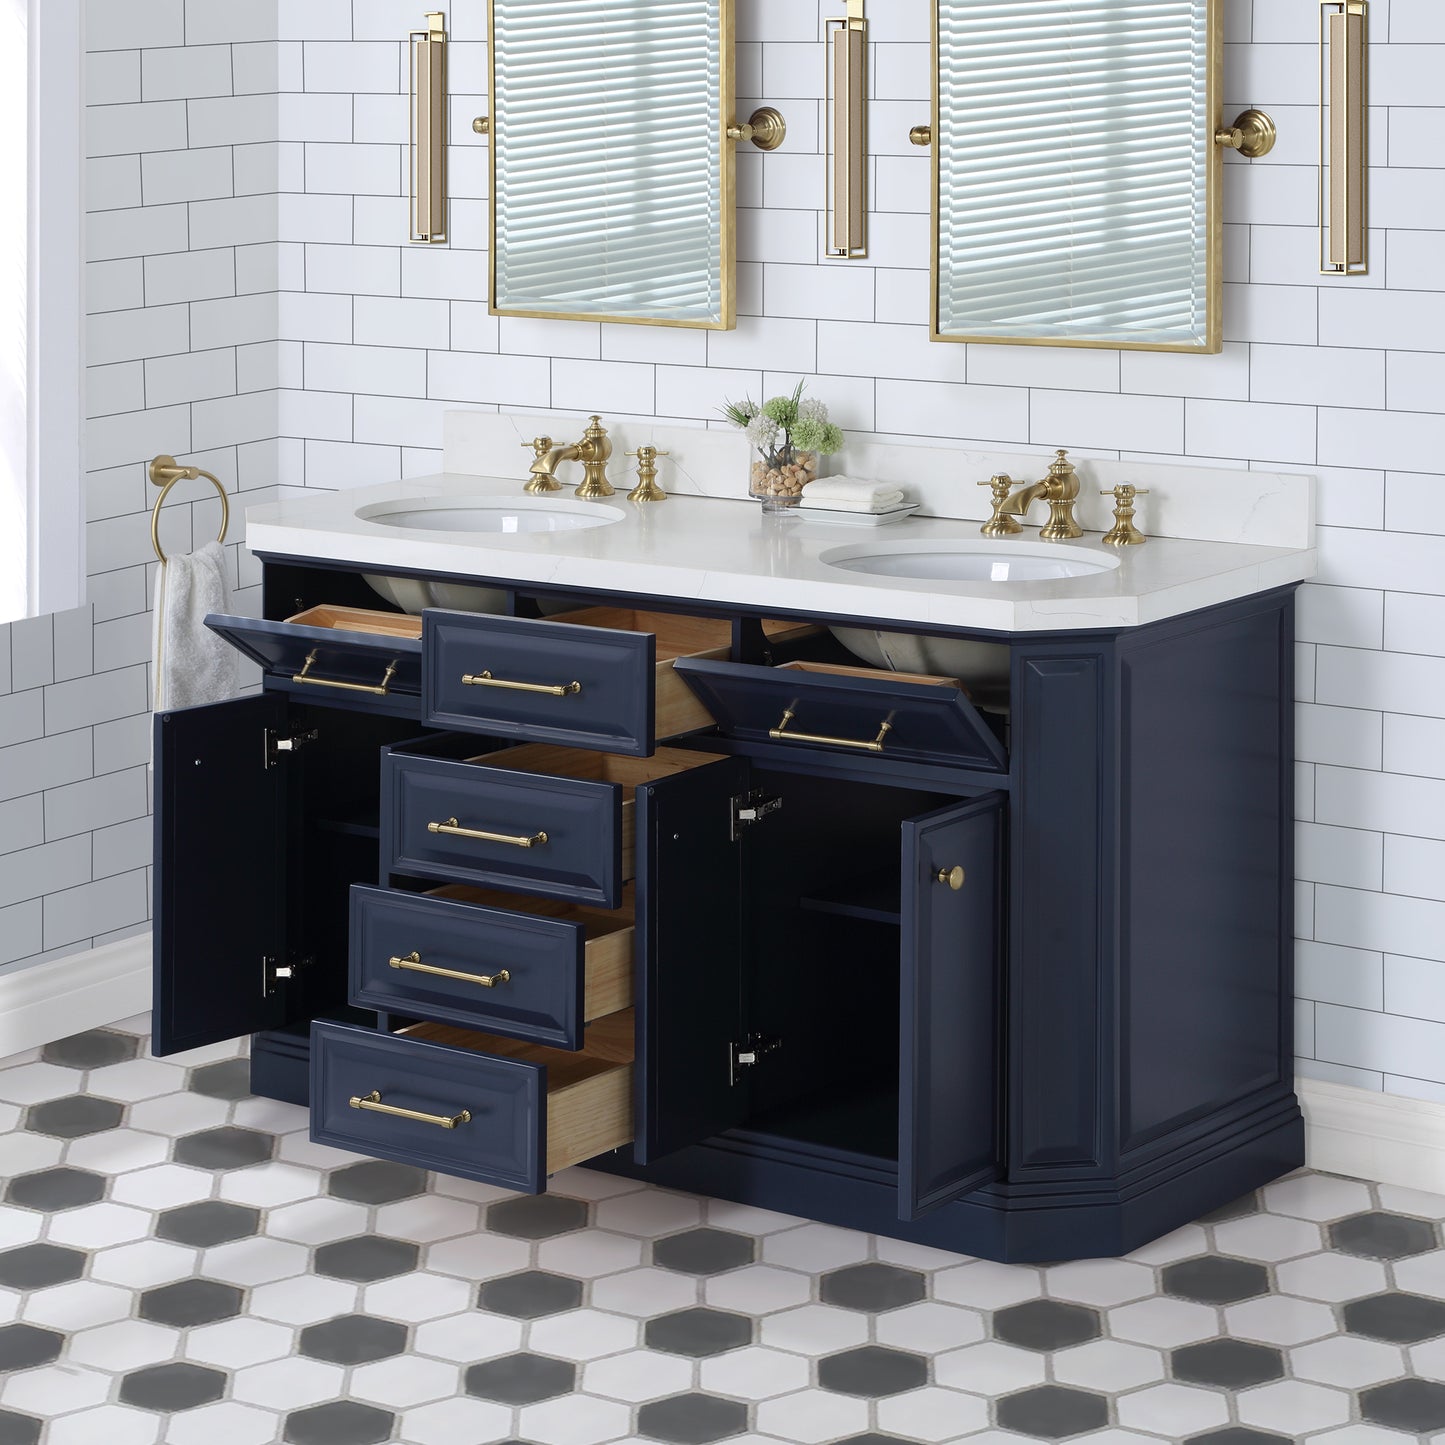 Water Creation Palace 60" Inch Double Sink White Quartz Countertop Vanity in Monarch Blue with Waterfall Faucets - Luxe Bathroom Vanities